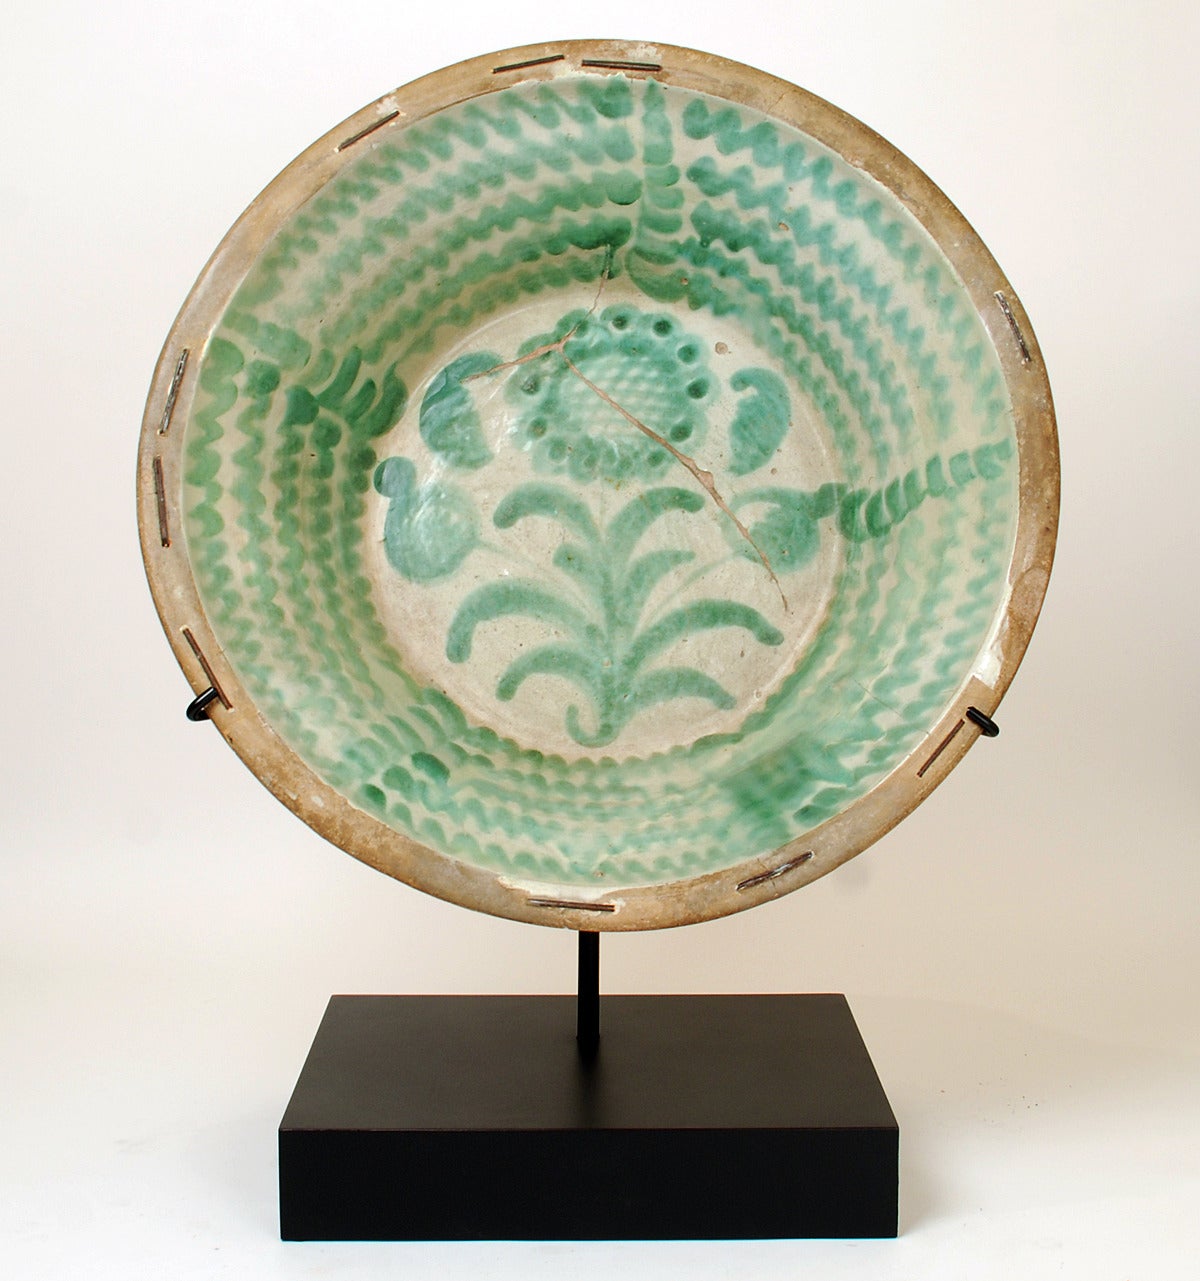 A large and impressive mid-19th century Spanish stoneware 'lebrillo' with beautiful 'morisco' green glaze over a milk white slip. This lebrillo features a large sunflower motif surrounded by whimsical foliate motifs Granada, circa 1860. Verso with